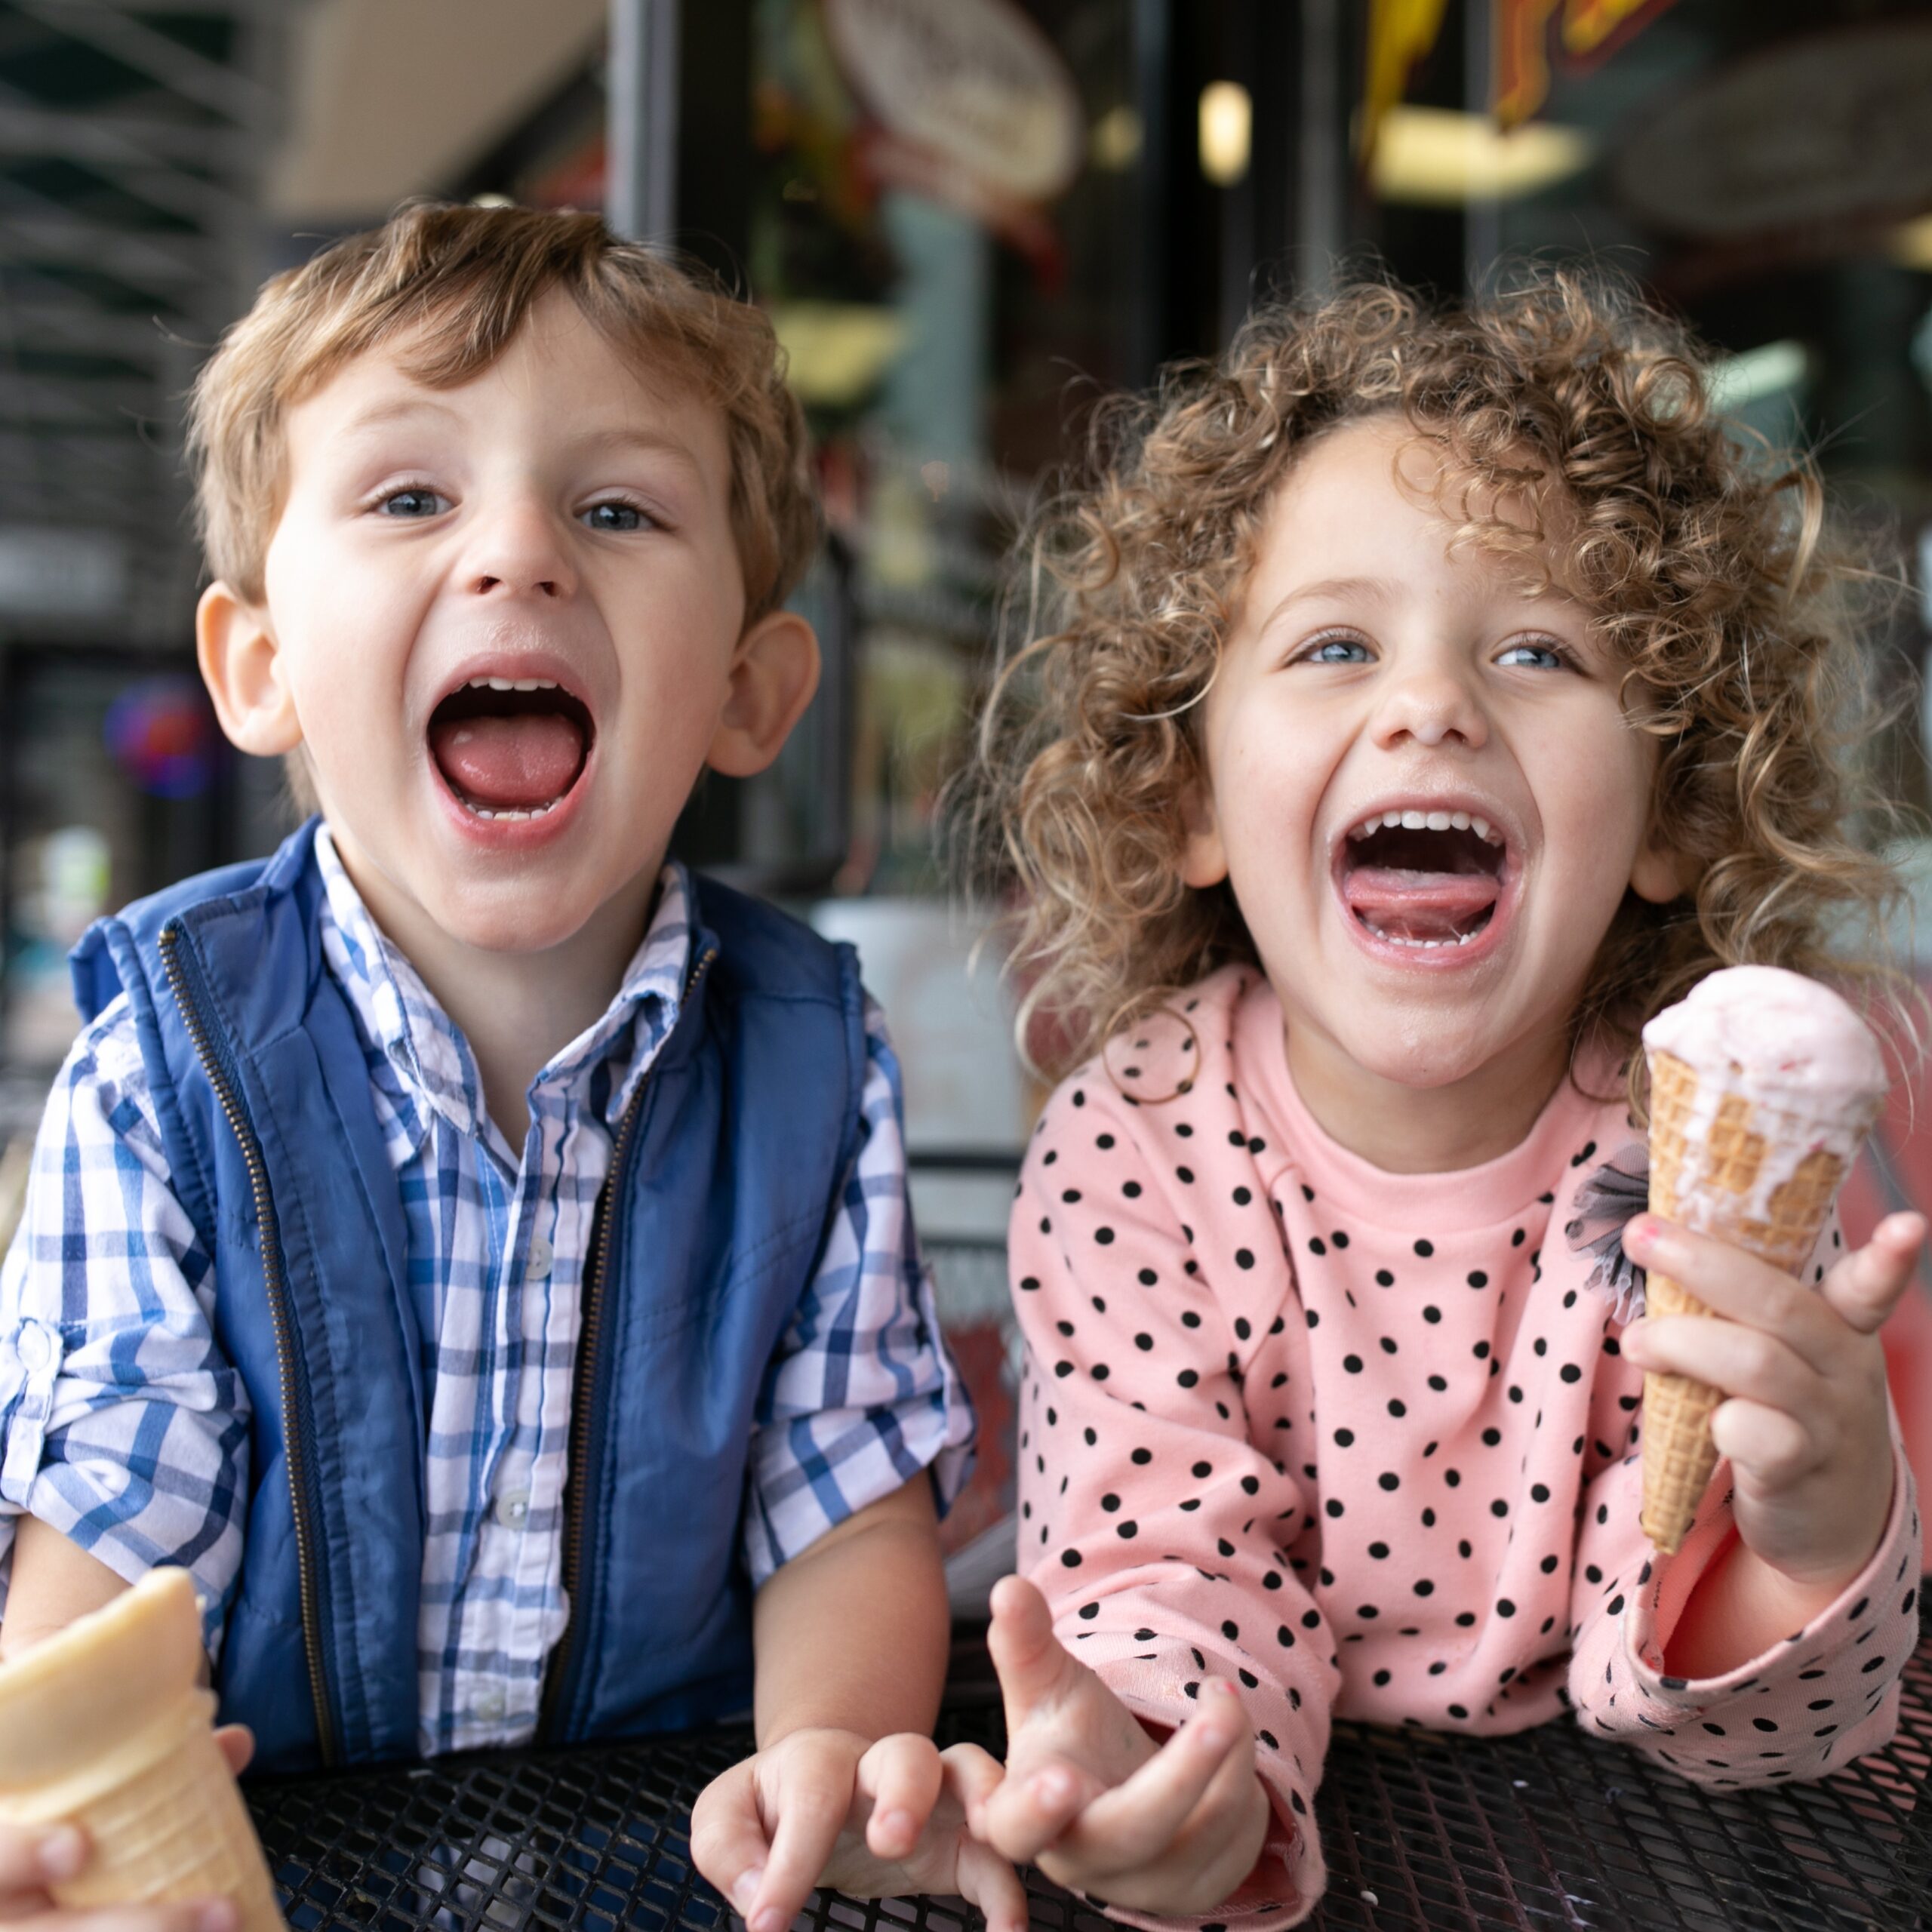 Kids sticking their tongues out and holding ice cream cones